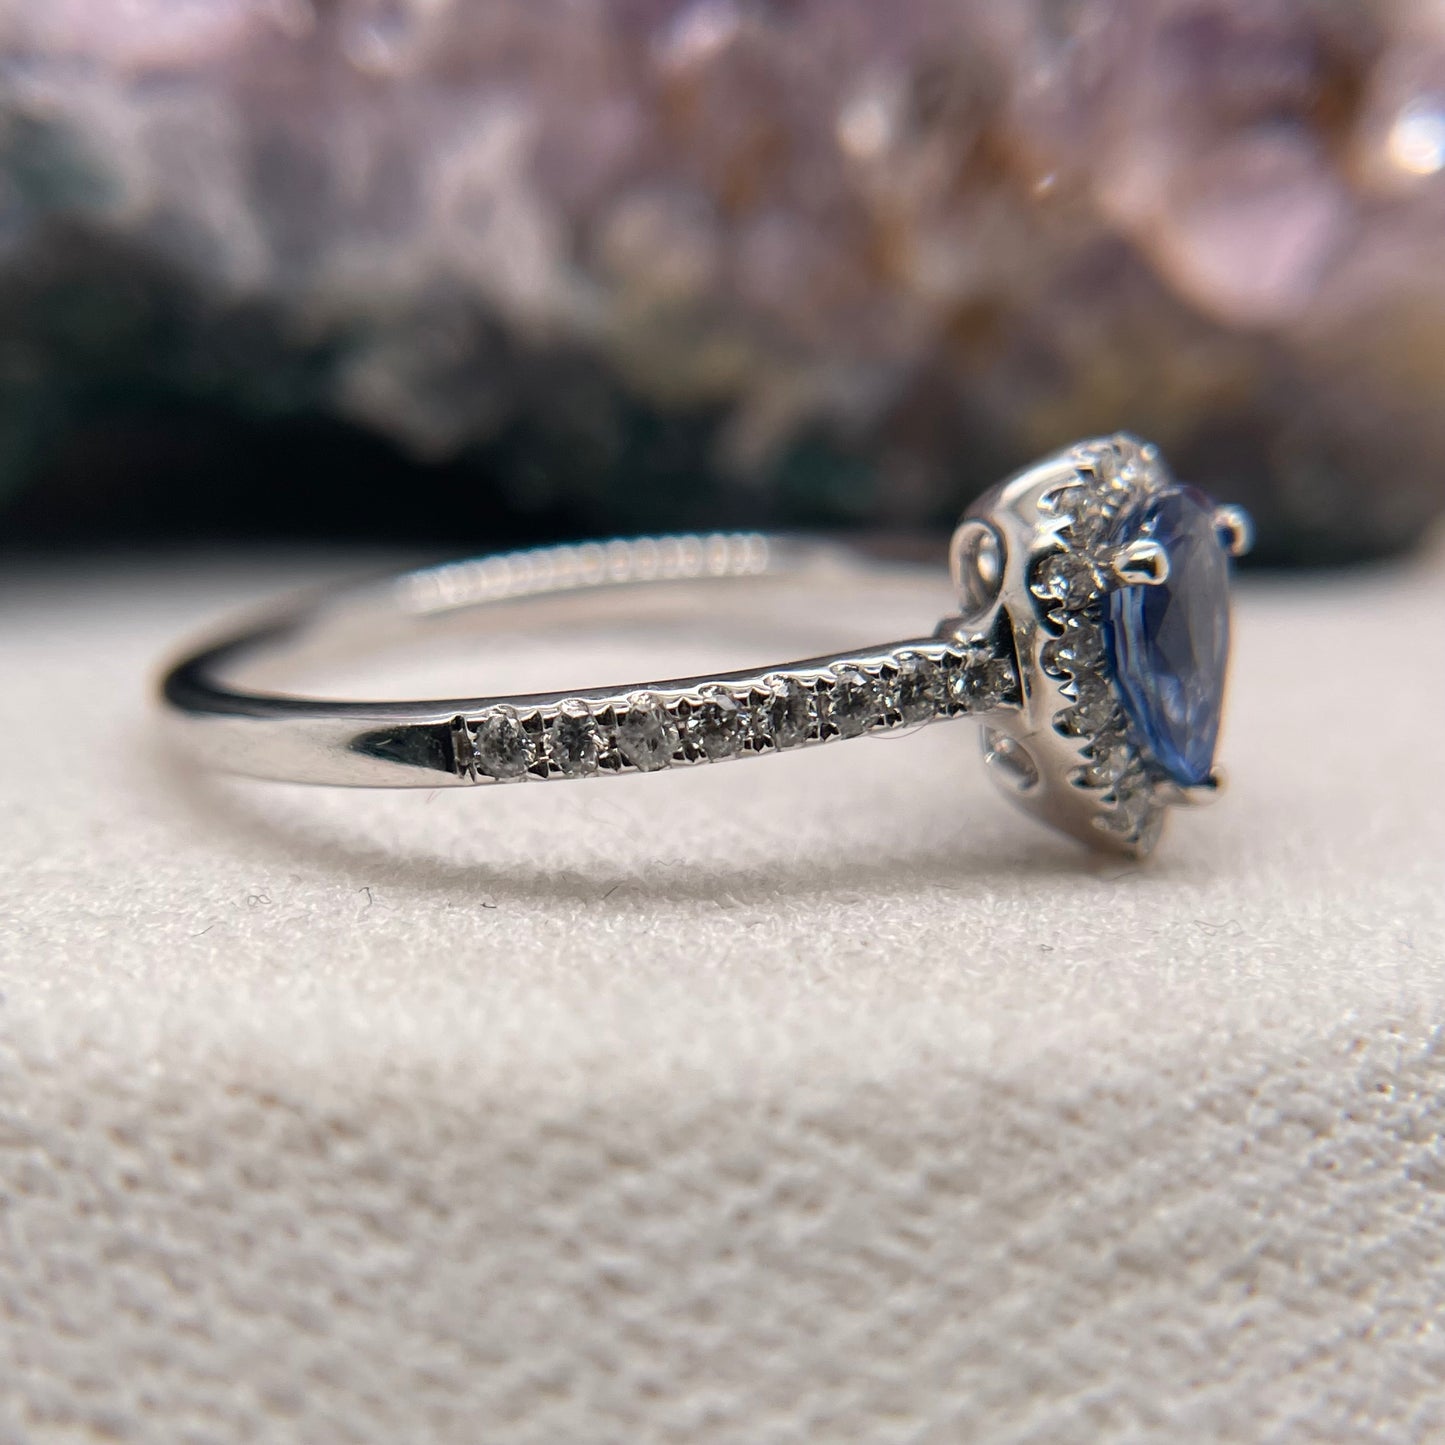 14K White Gold Sapphire Ring with Diamond